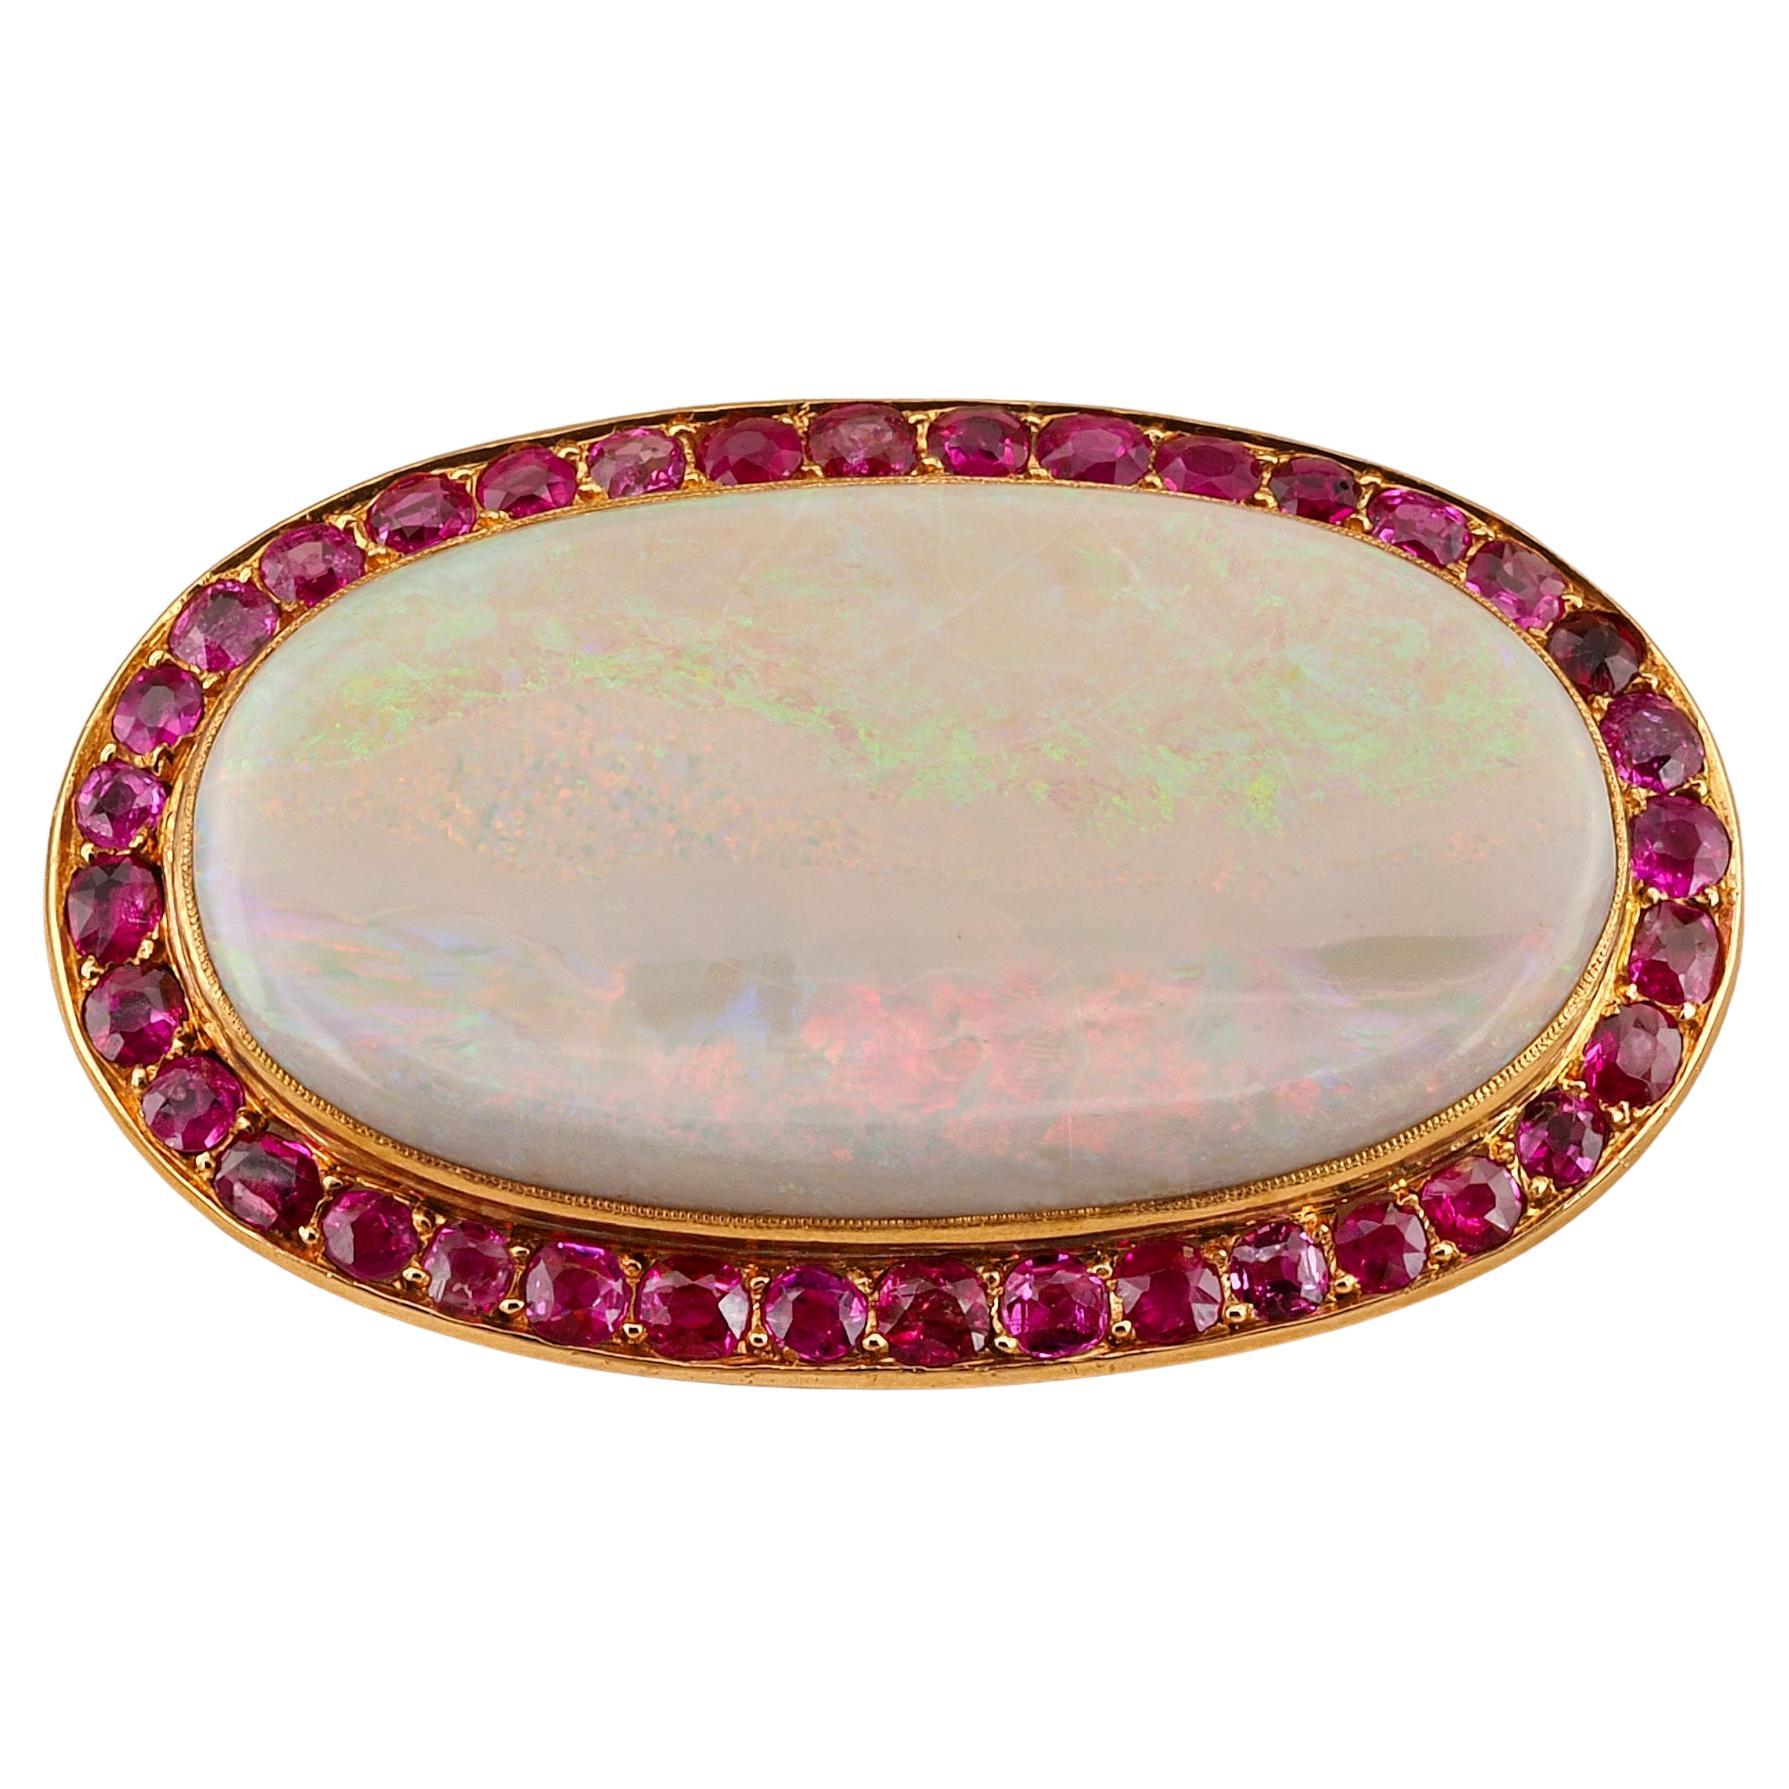 French Victorian 39.00 Ct Australian Opal 6.00 Ct Rubies Large Brooch